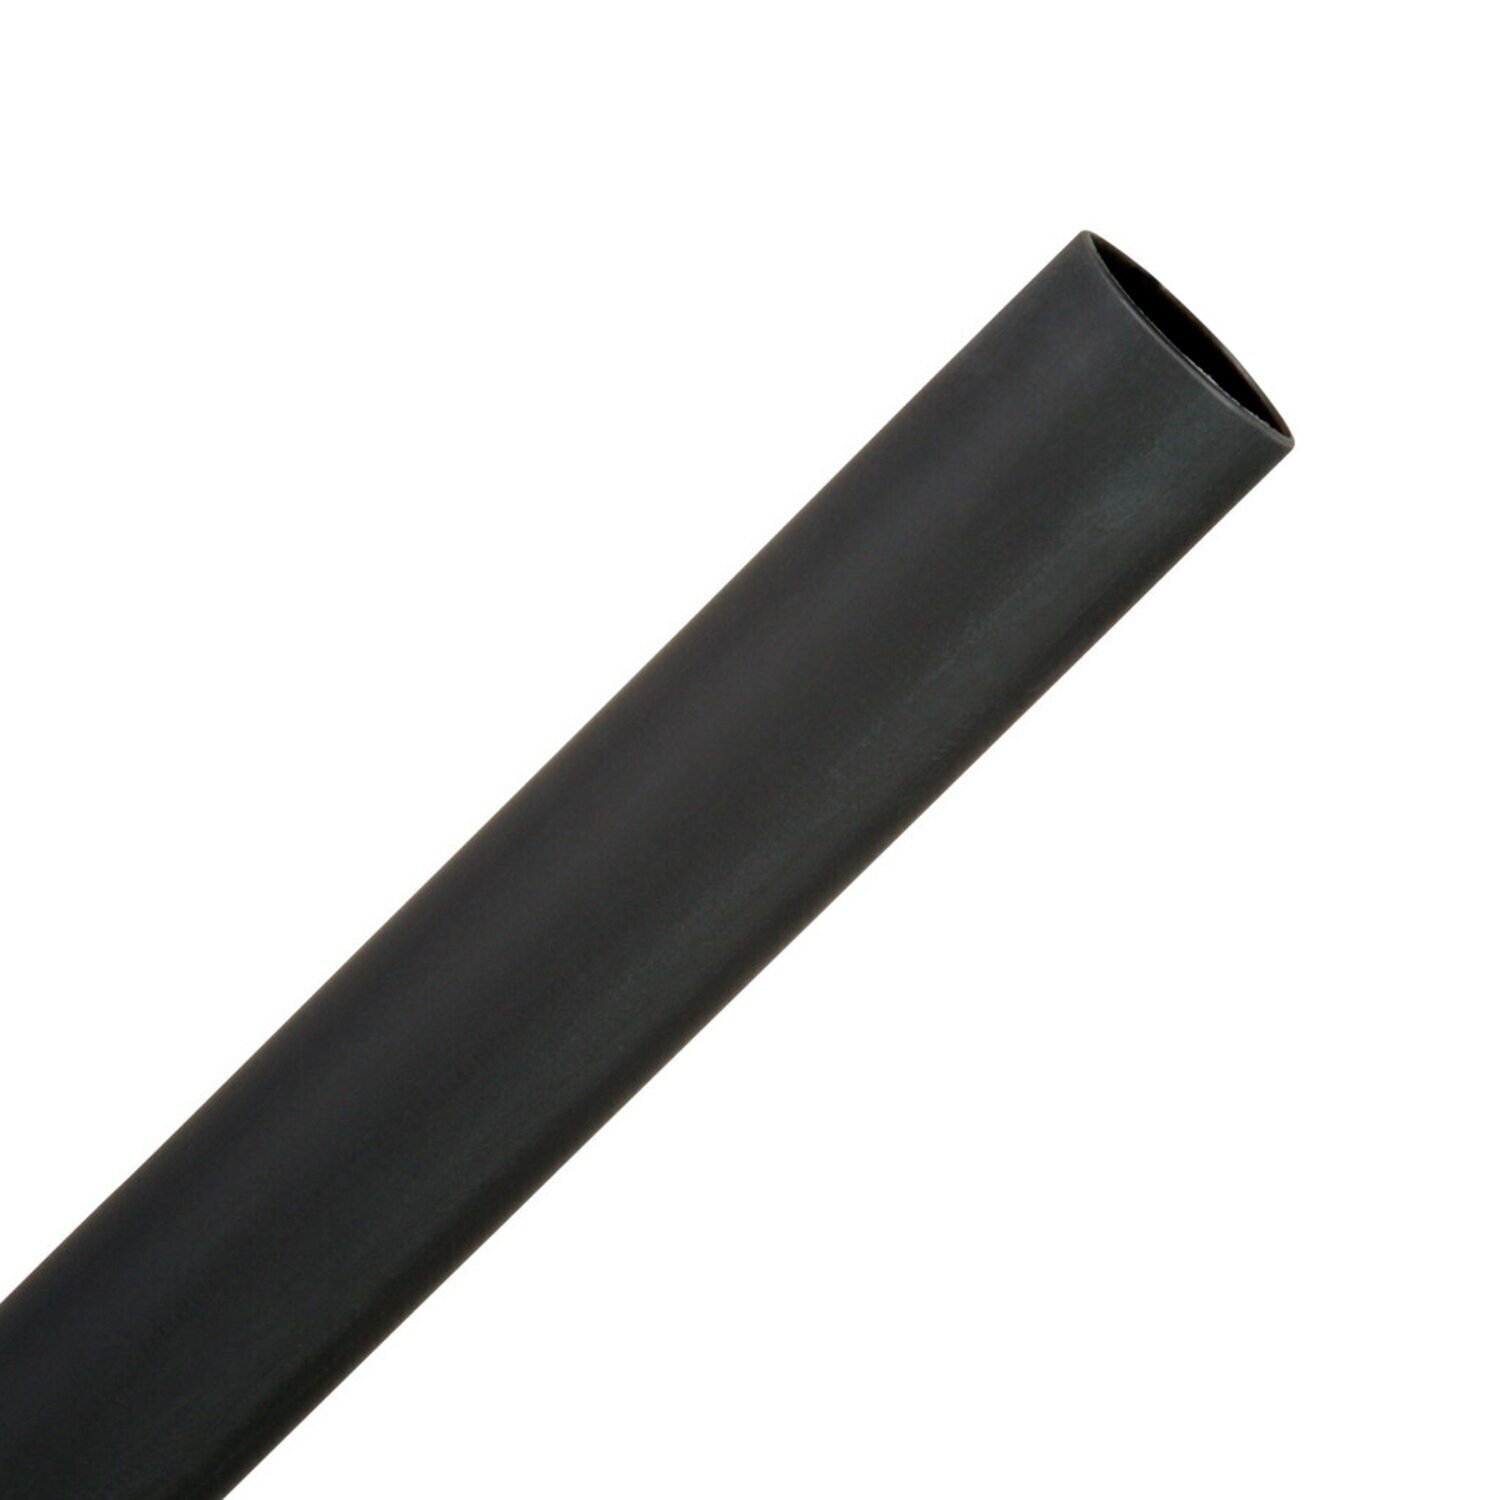 7000133685 - 3M Thin-Wall Heat Shrink Tubing EPS-300, Adhesive-Lined, 3/4-6"-Black,
6 in length sticks, 10 pieces/pack, 10 packs/case